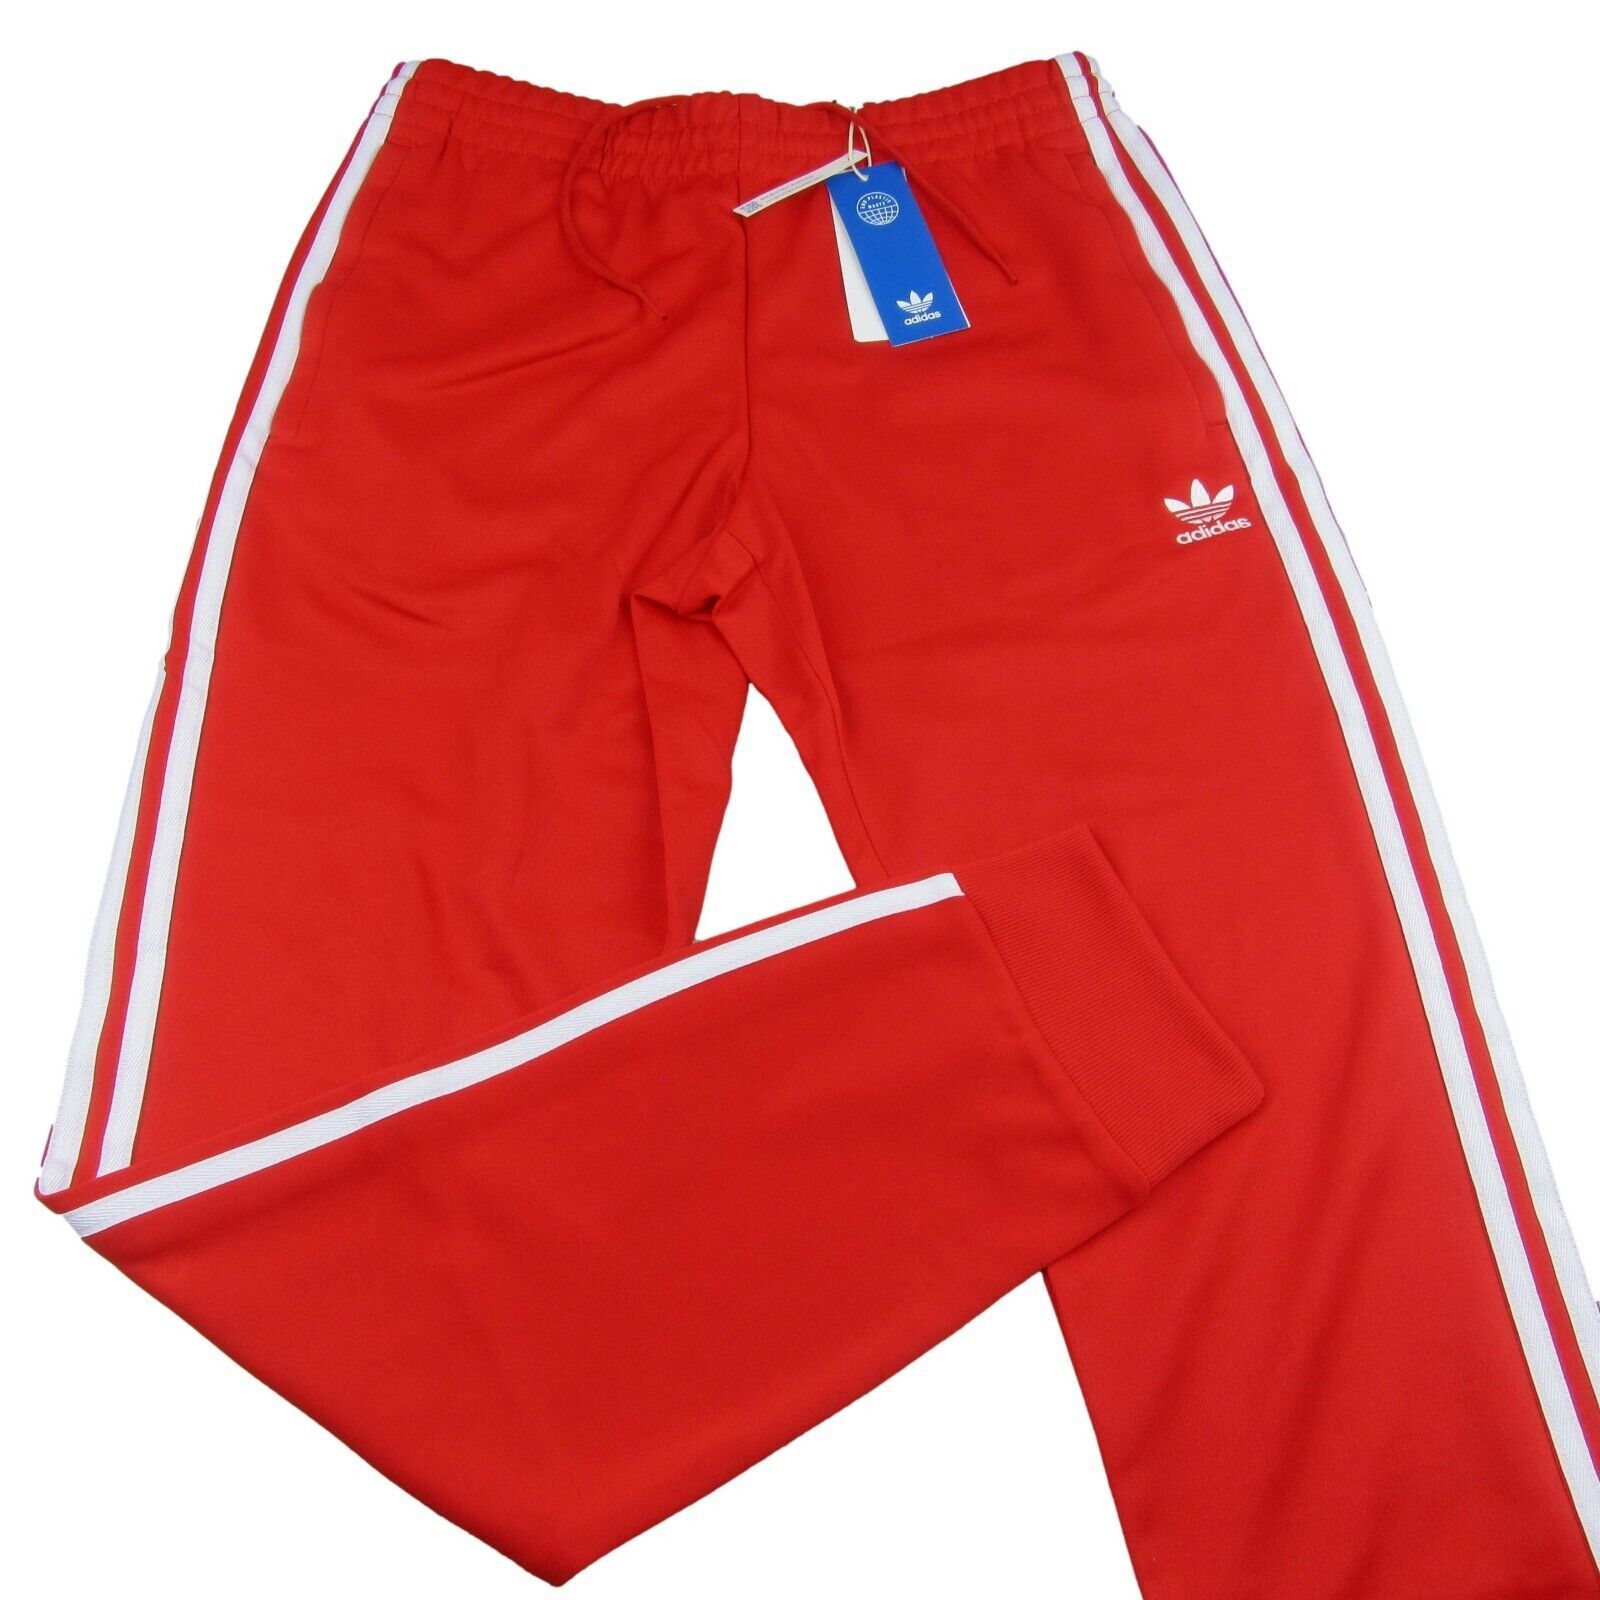 Primary image for Adidas Originals Adicolor Superstar Track Pants Men's Size Small NEW HF2134